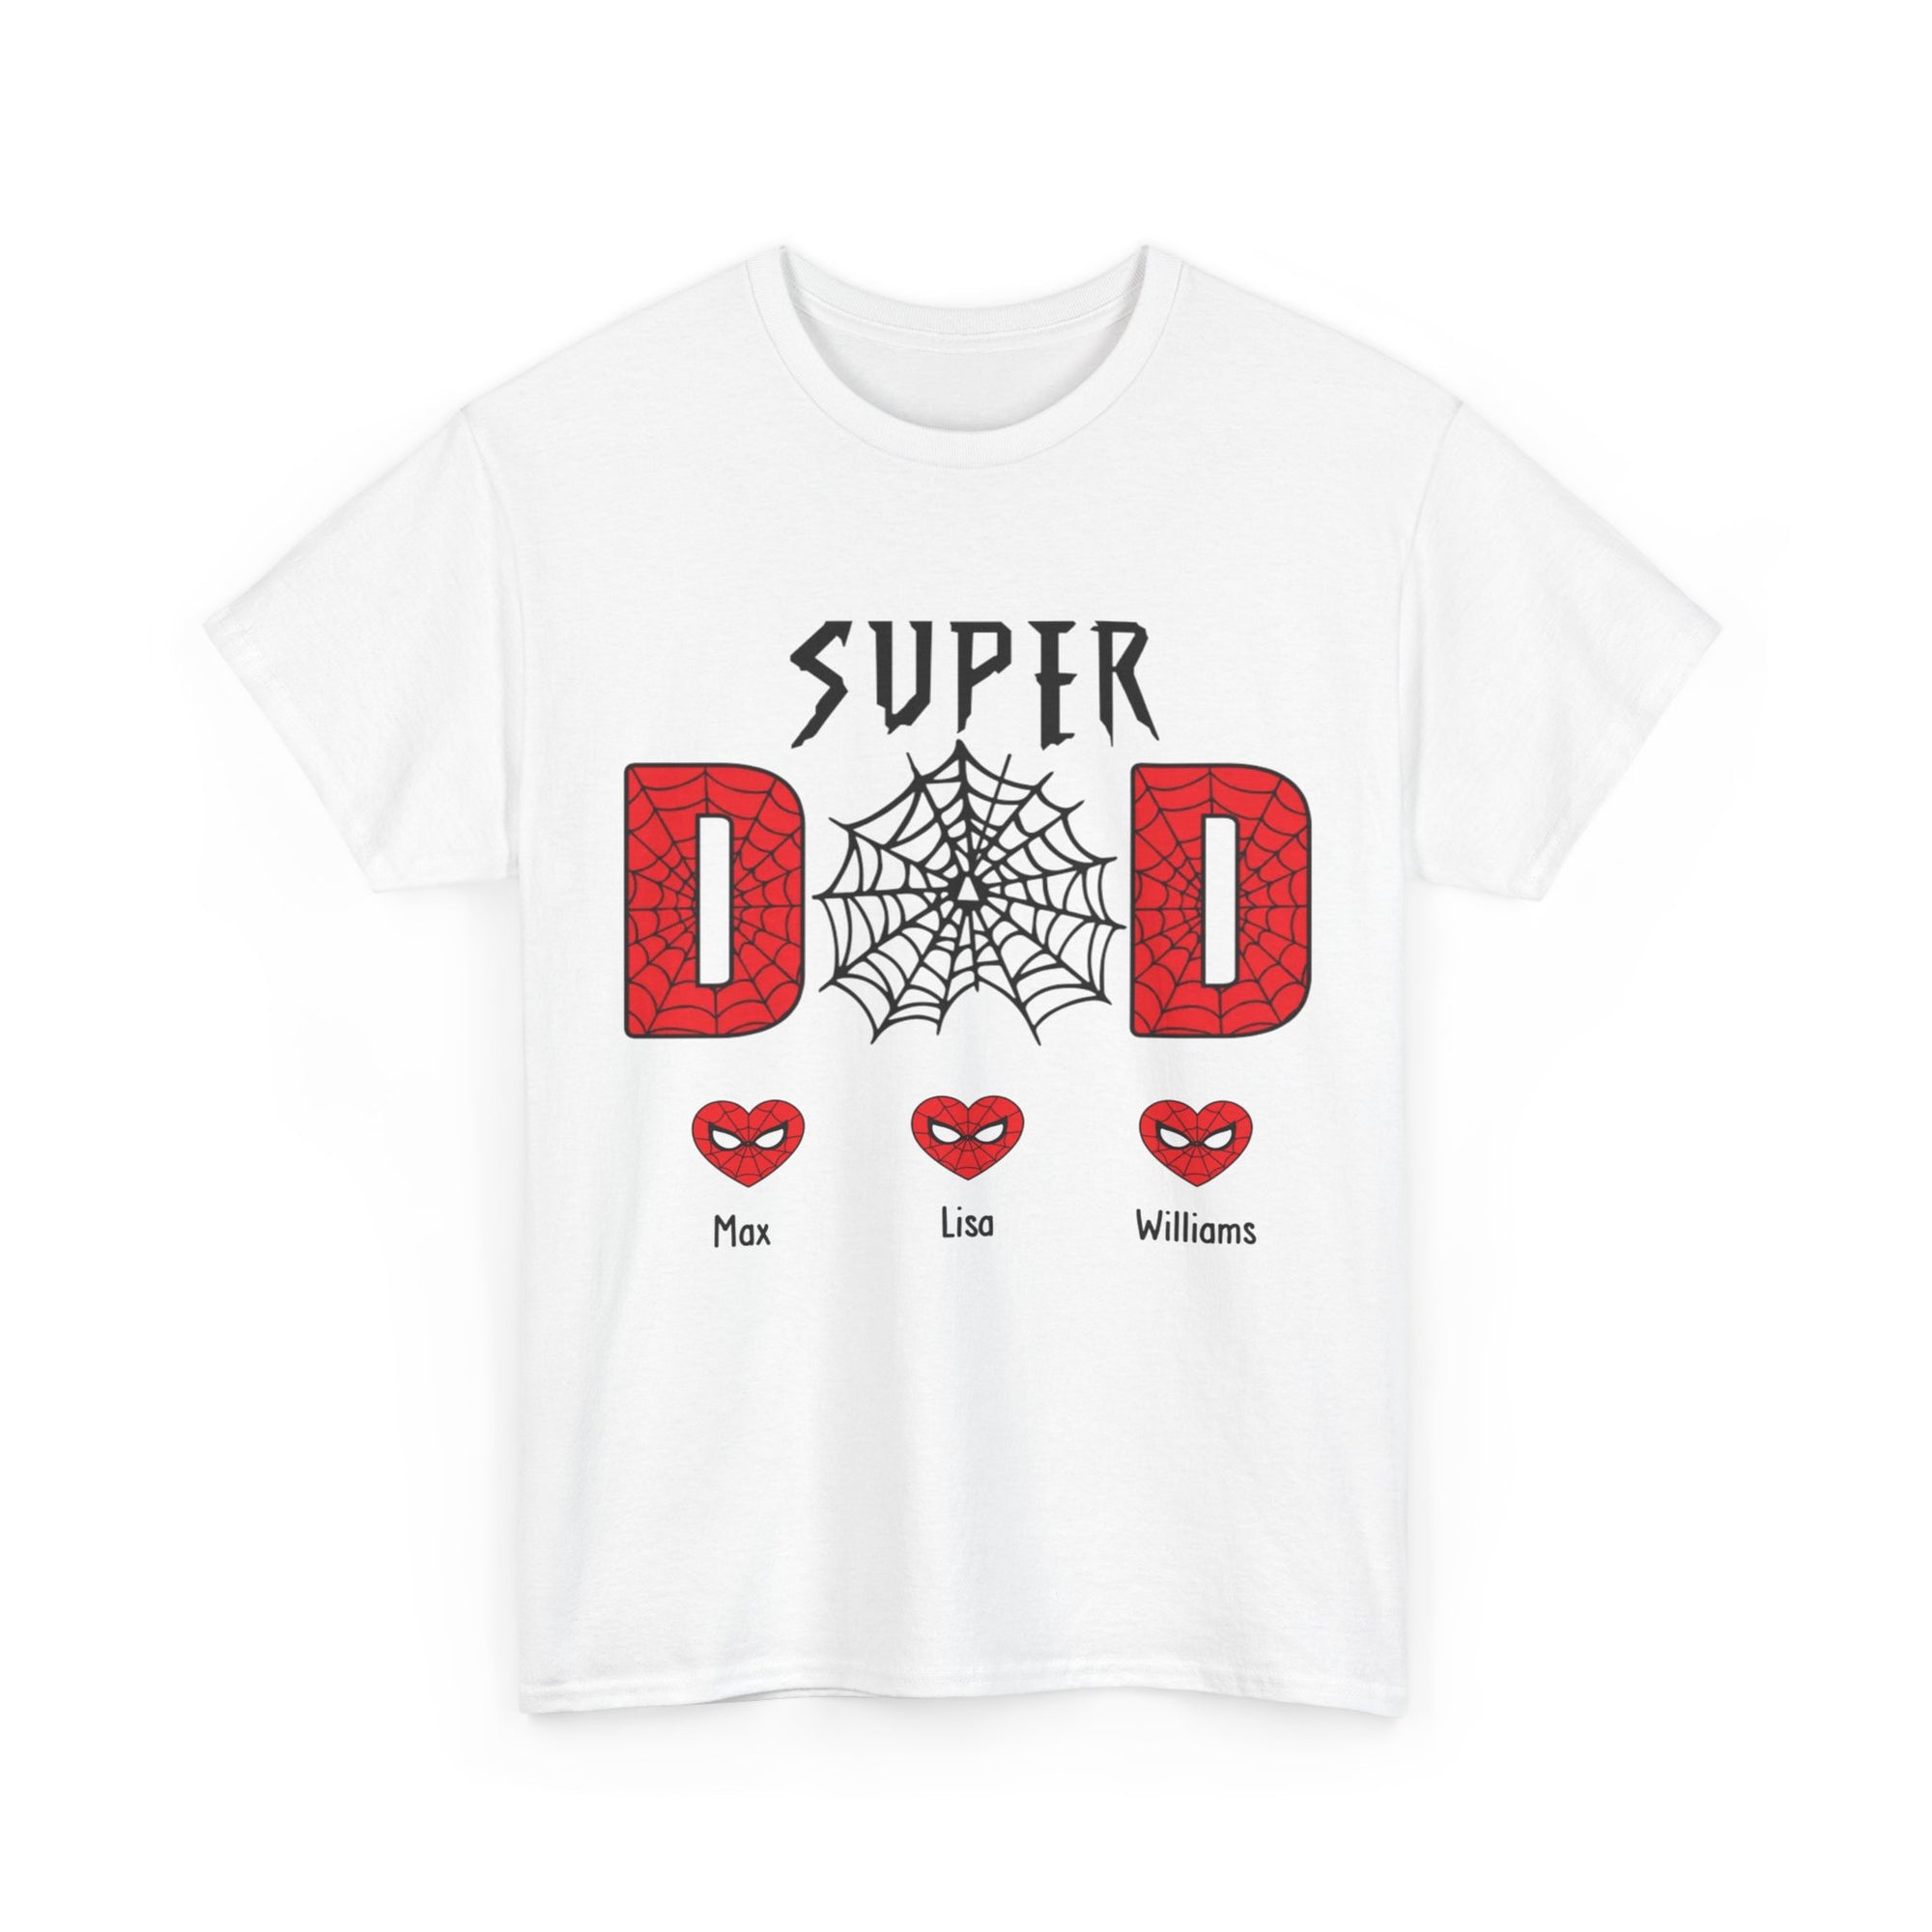 Super Dad Spider - Personalized Father's Day Shirts with Kids Name Shirt, Unique Gift for Dad